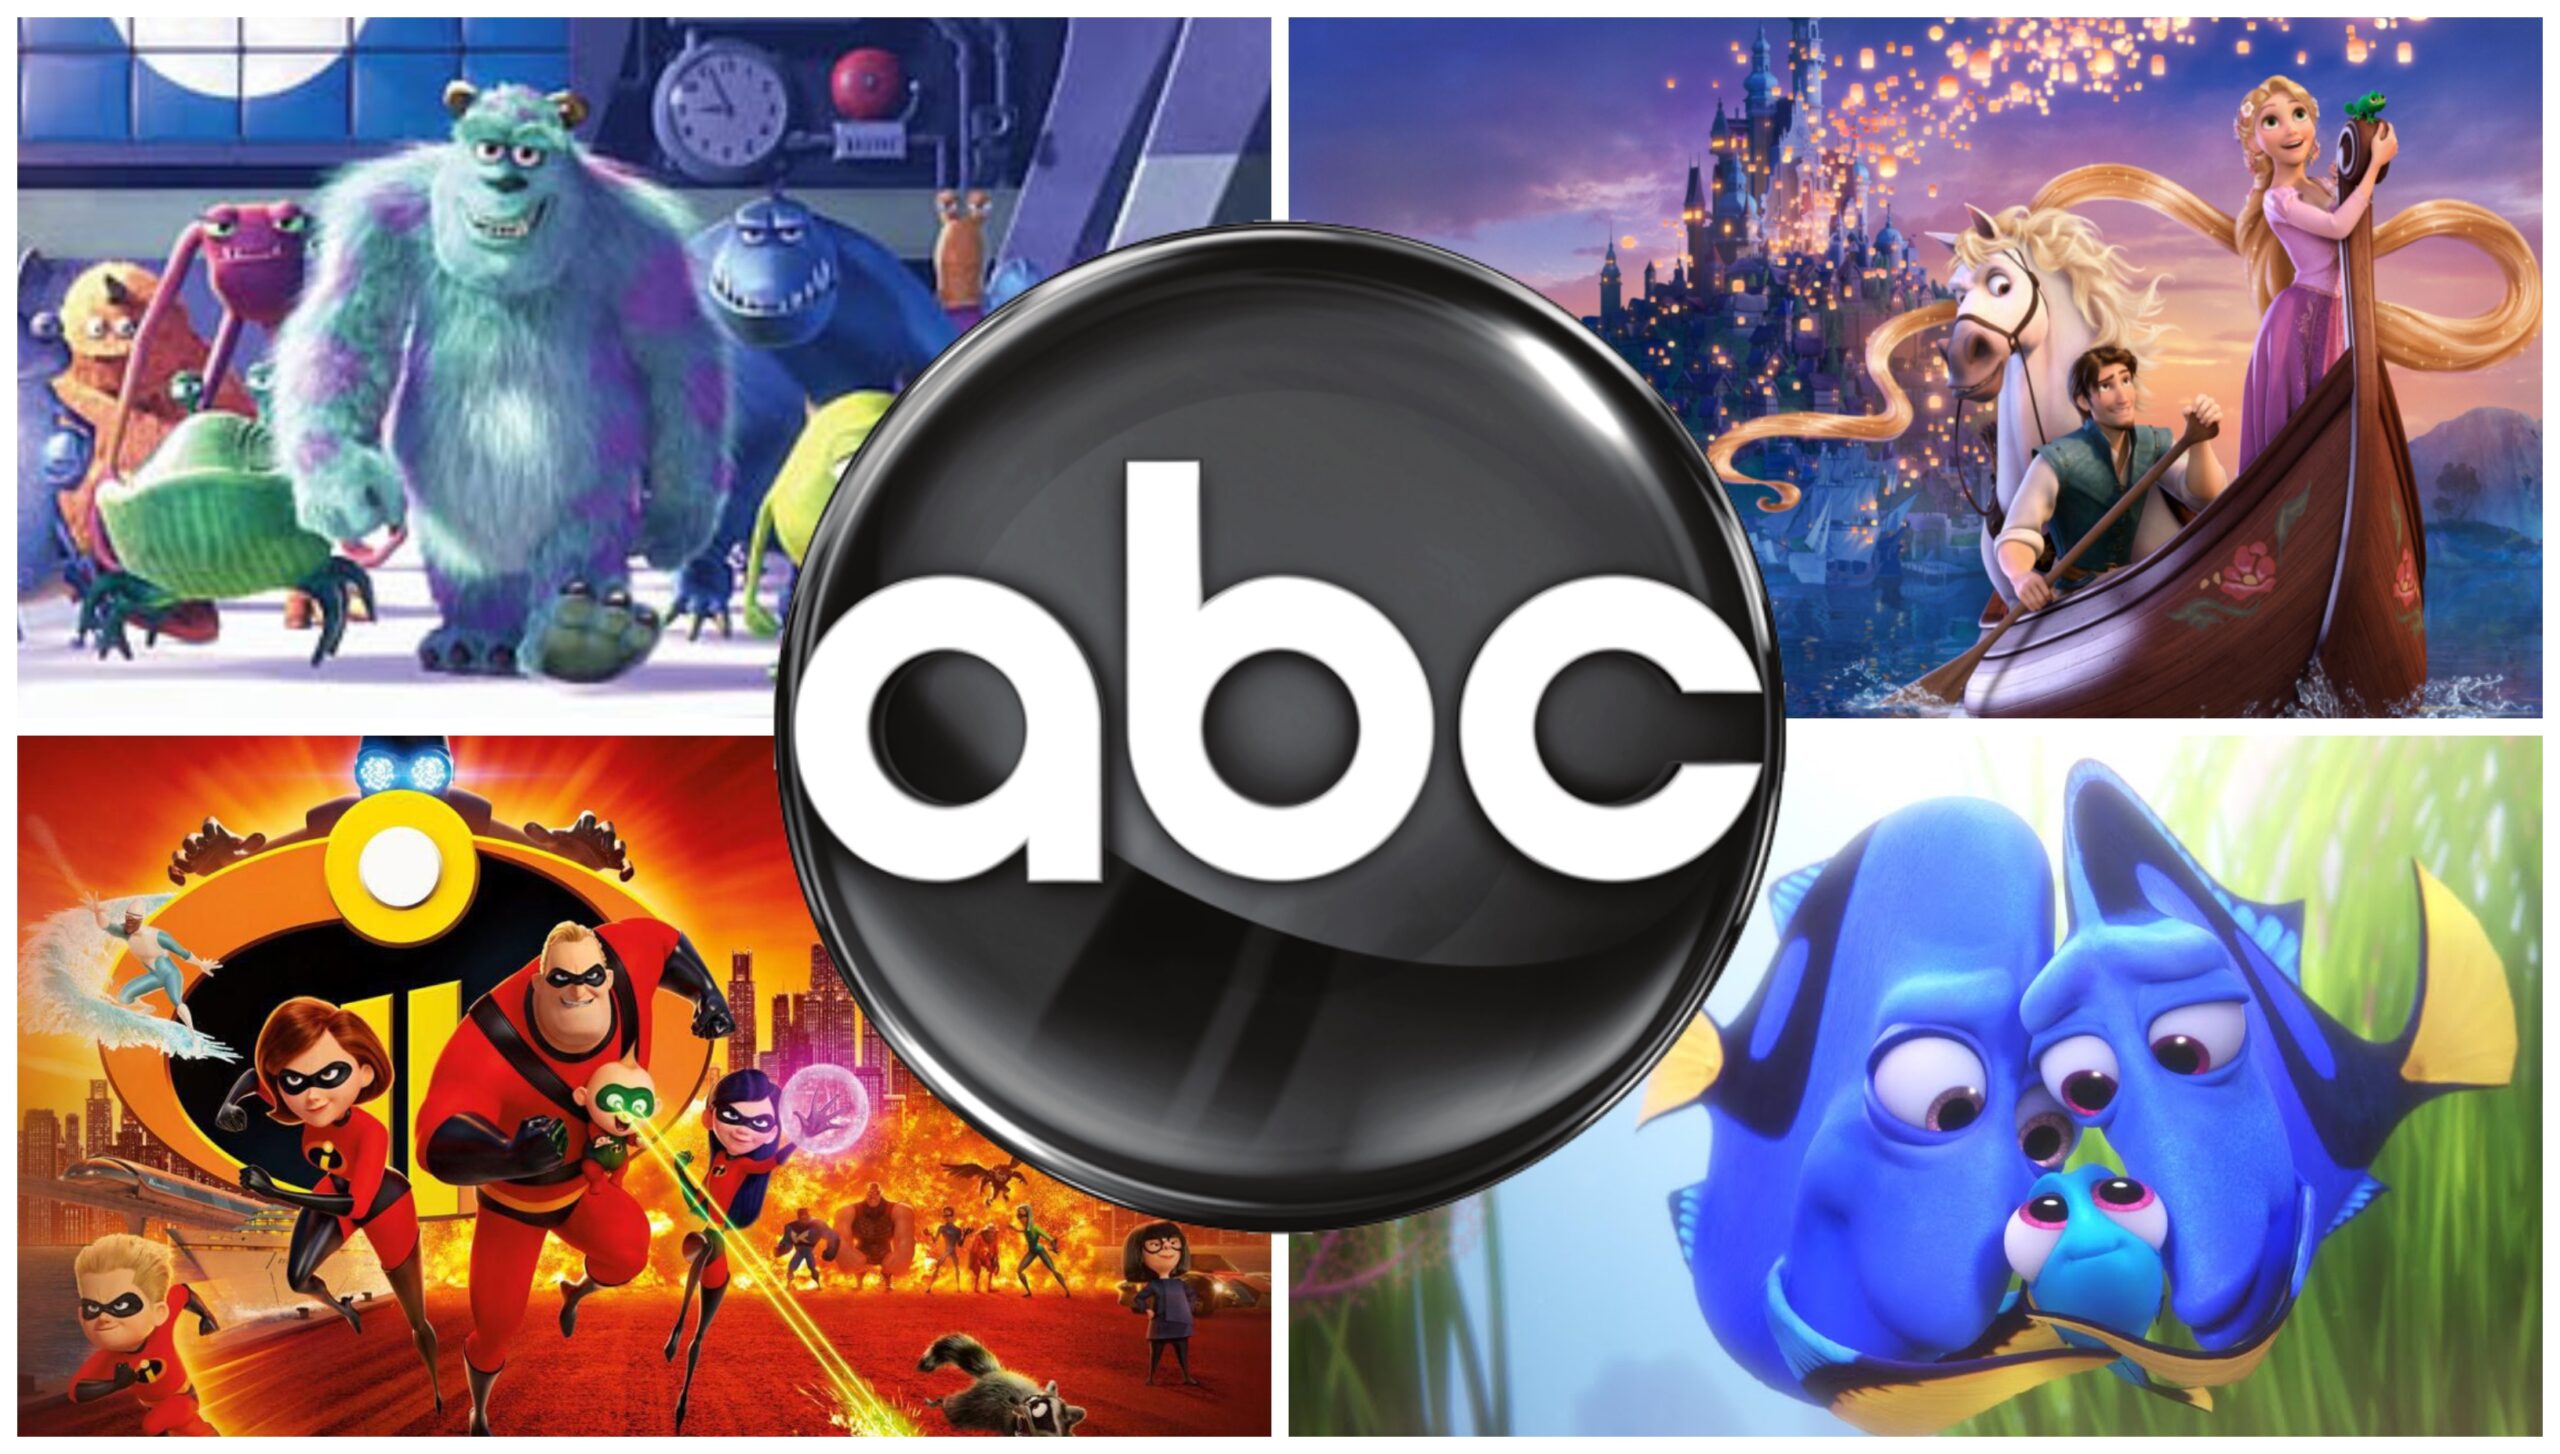 'The Wonderful World of Disney' Returns This May on ABC